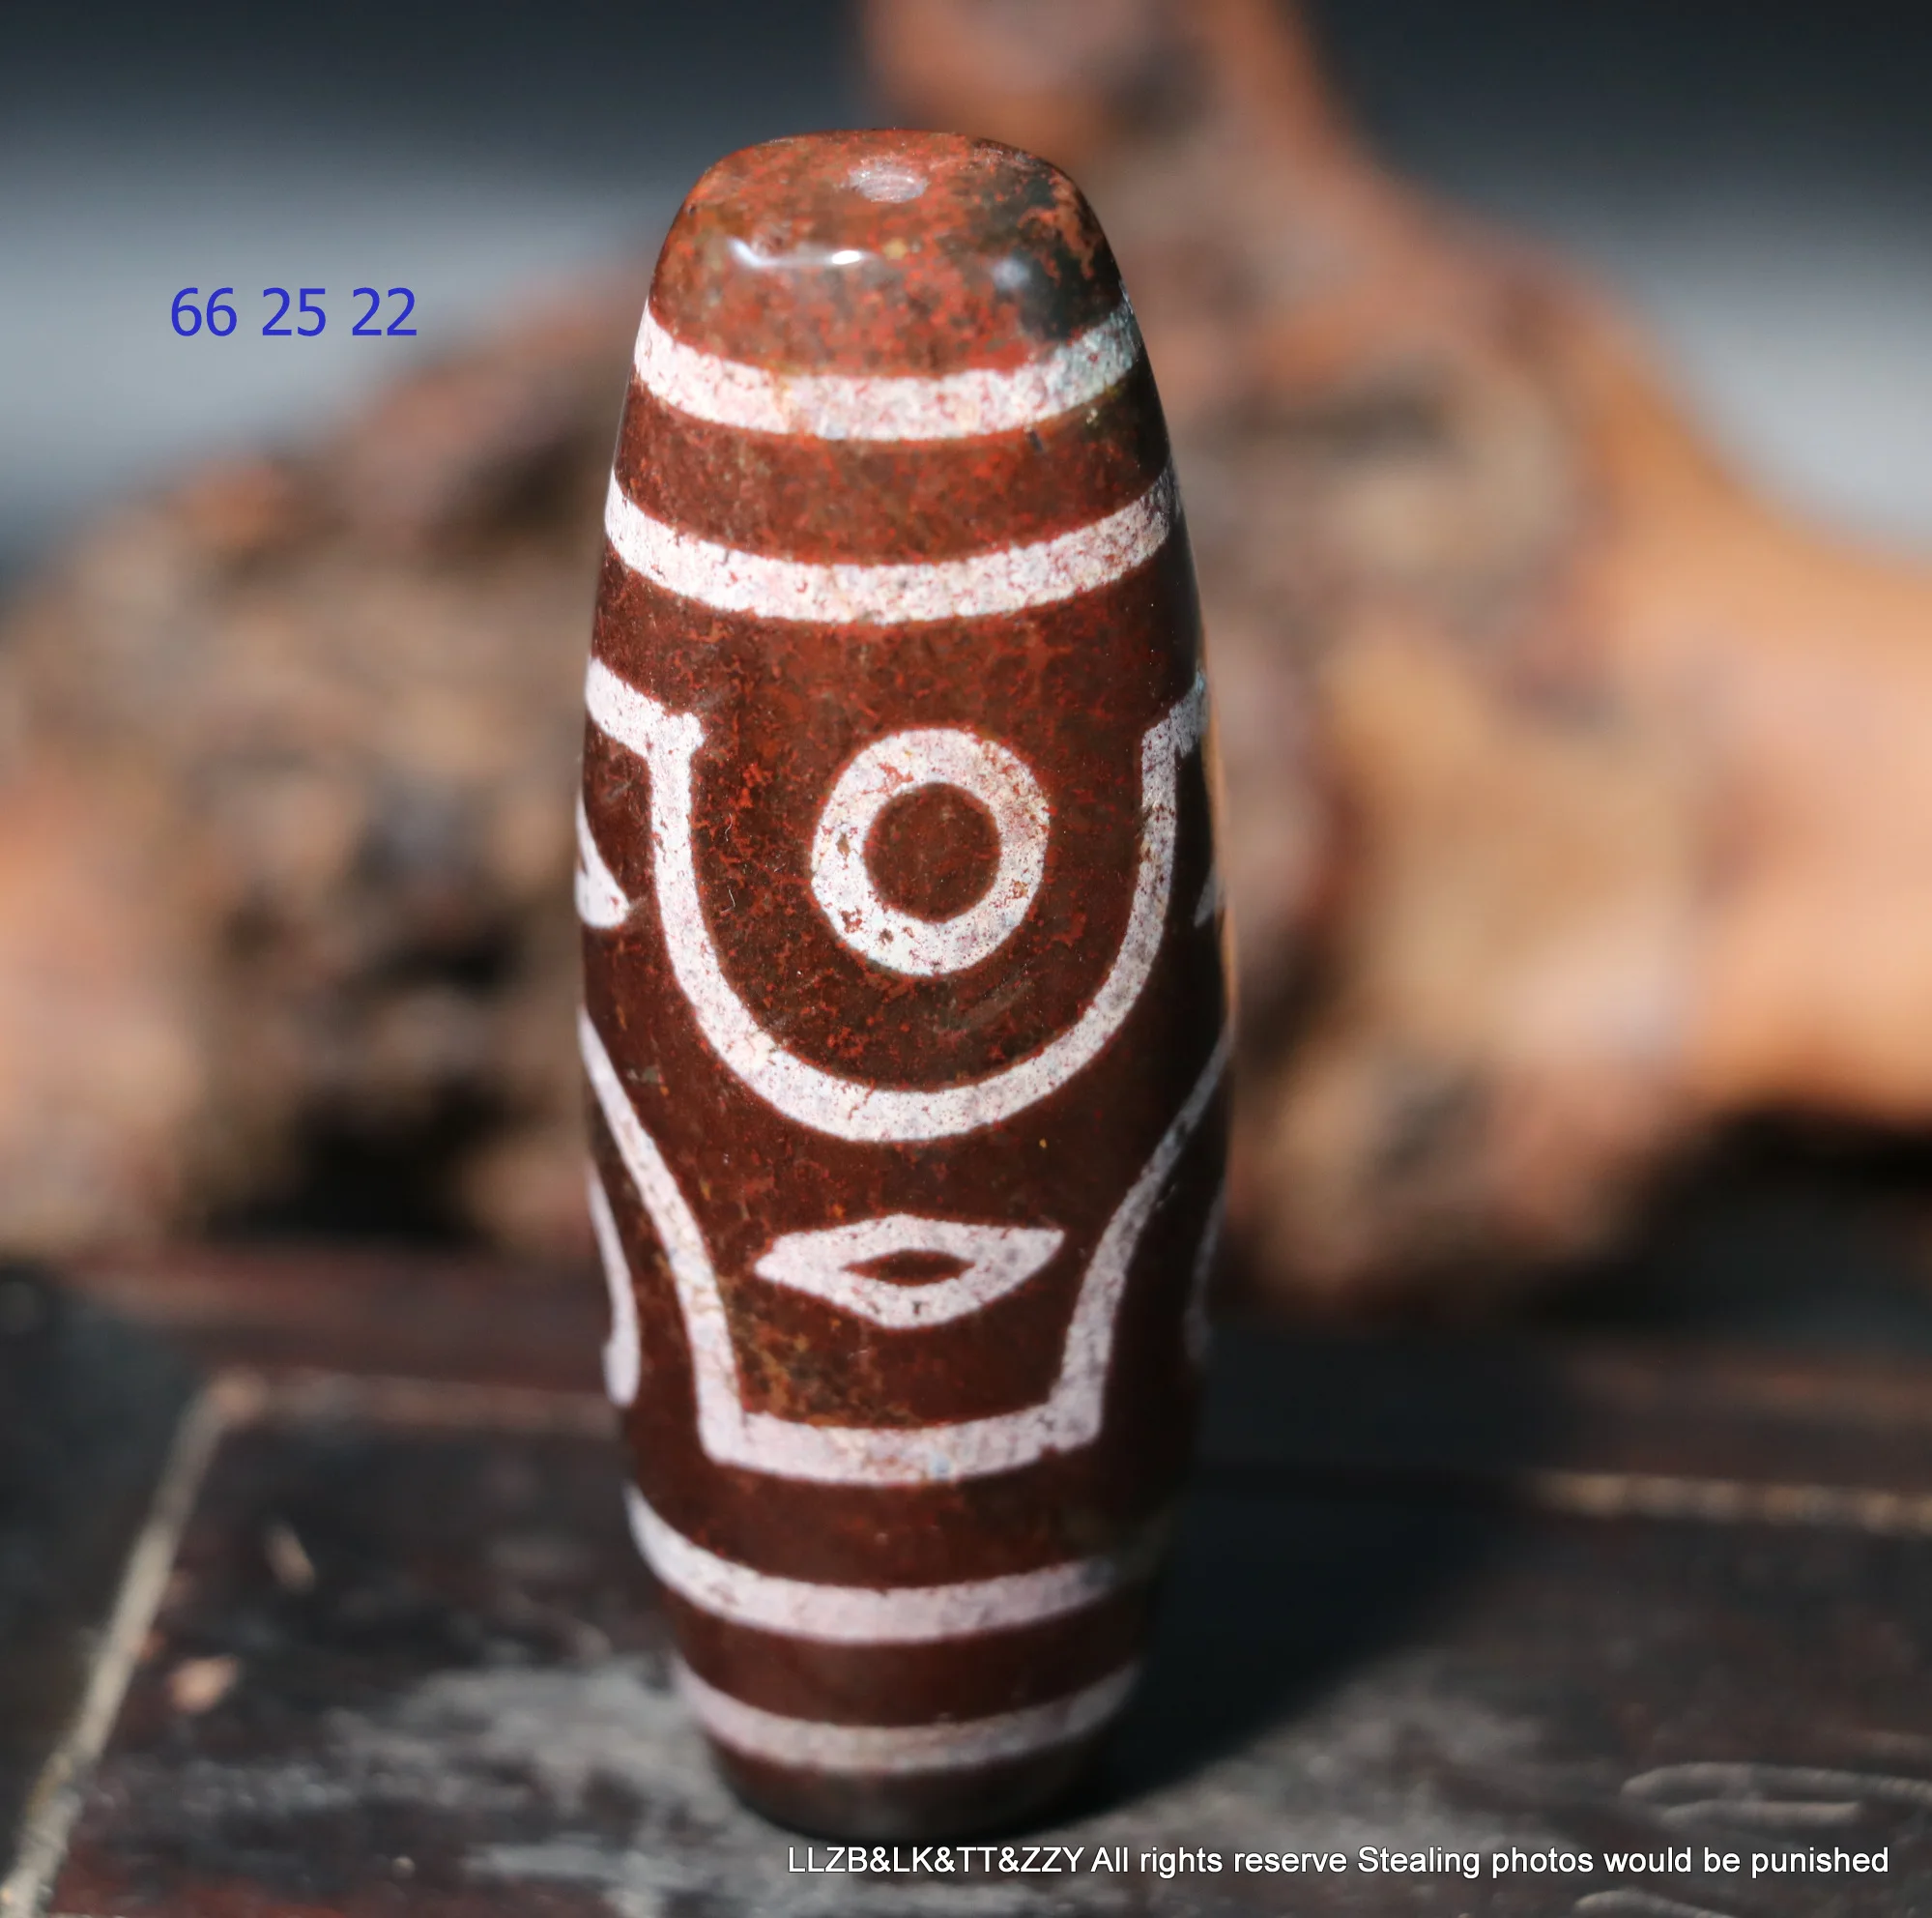 Super Energy Tibetan old Agate Unique Eye Buddha Eye Large Drum Shape dZi Bead For Display Amulet 5A LKbrother Sauces UPM06D16F2